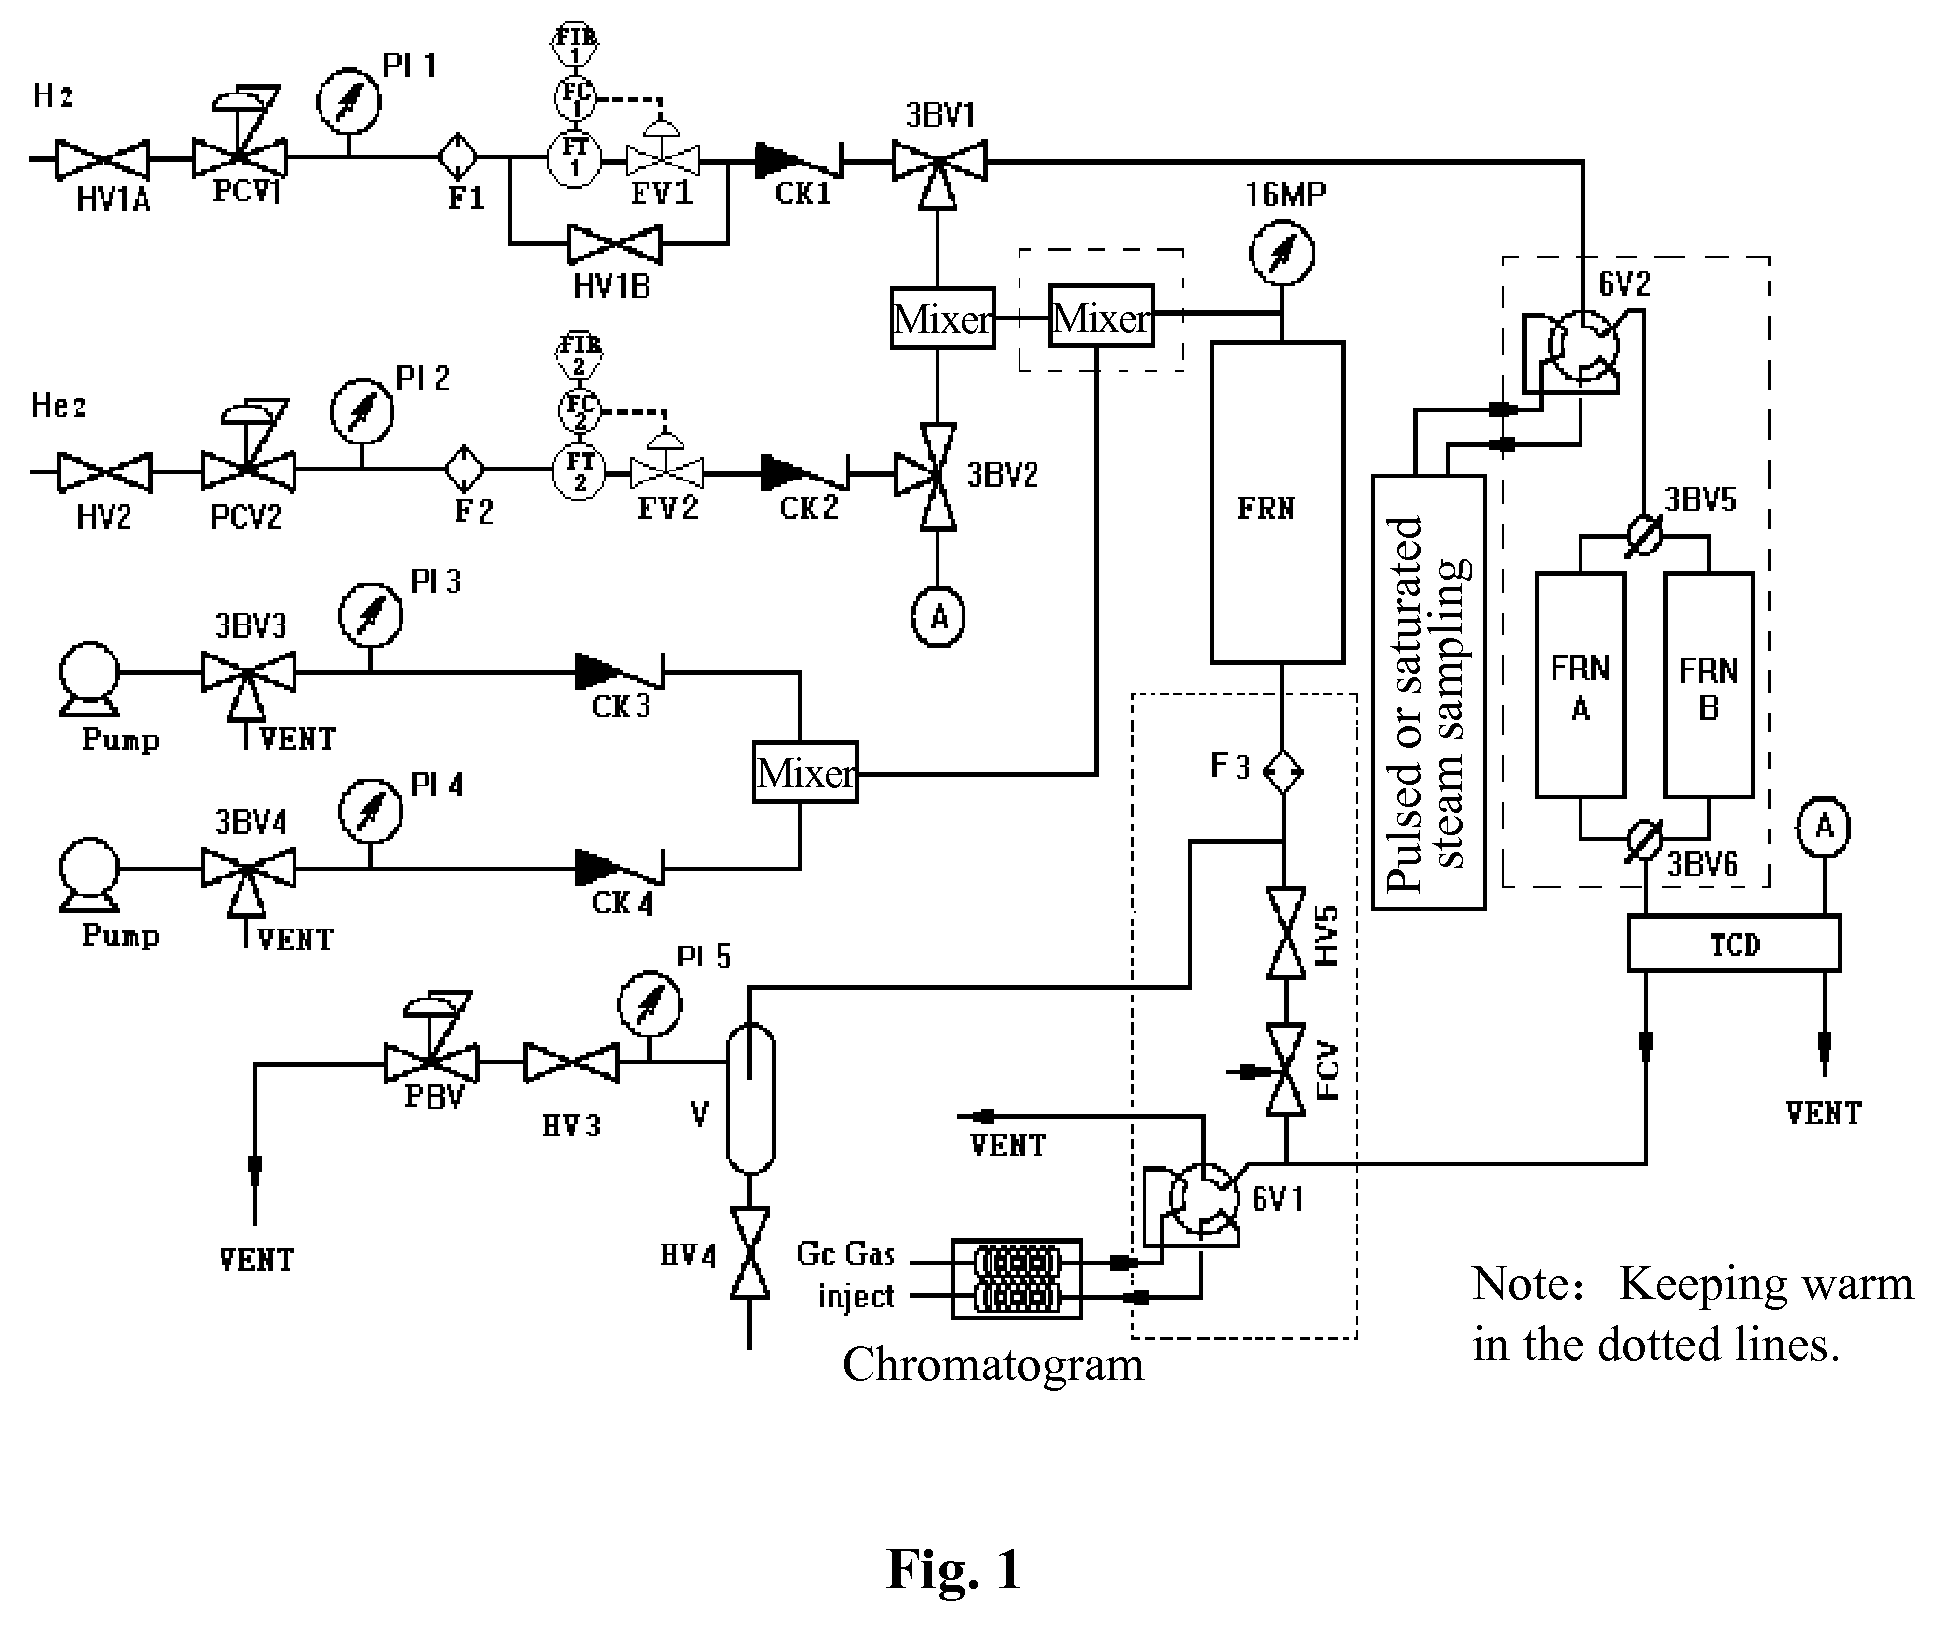 Process for preparing catalyst comprising palladium supported on carrier with high dispersion